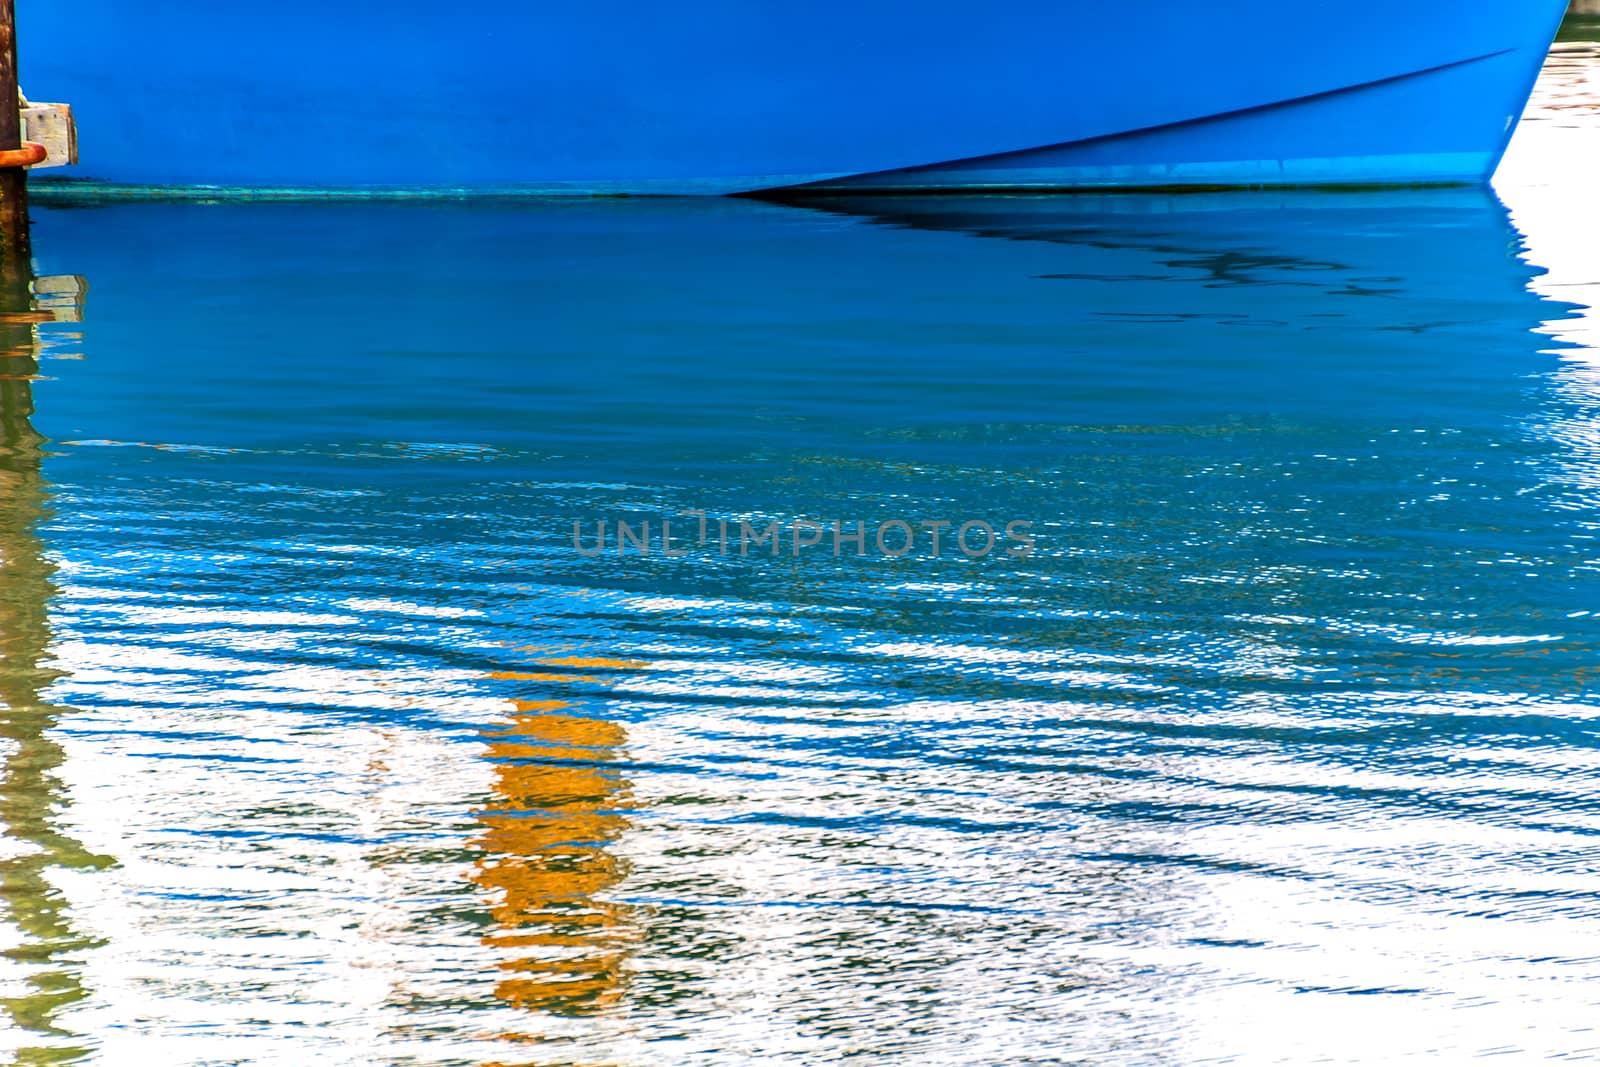 Blue Sailboat Reflection Westport Grays Harbor Washington State by bill_perry